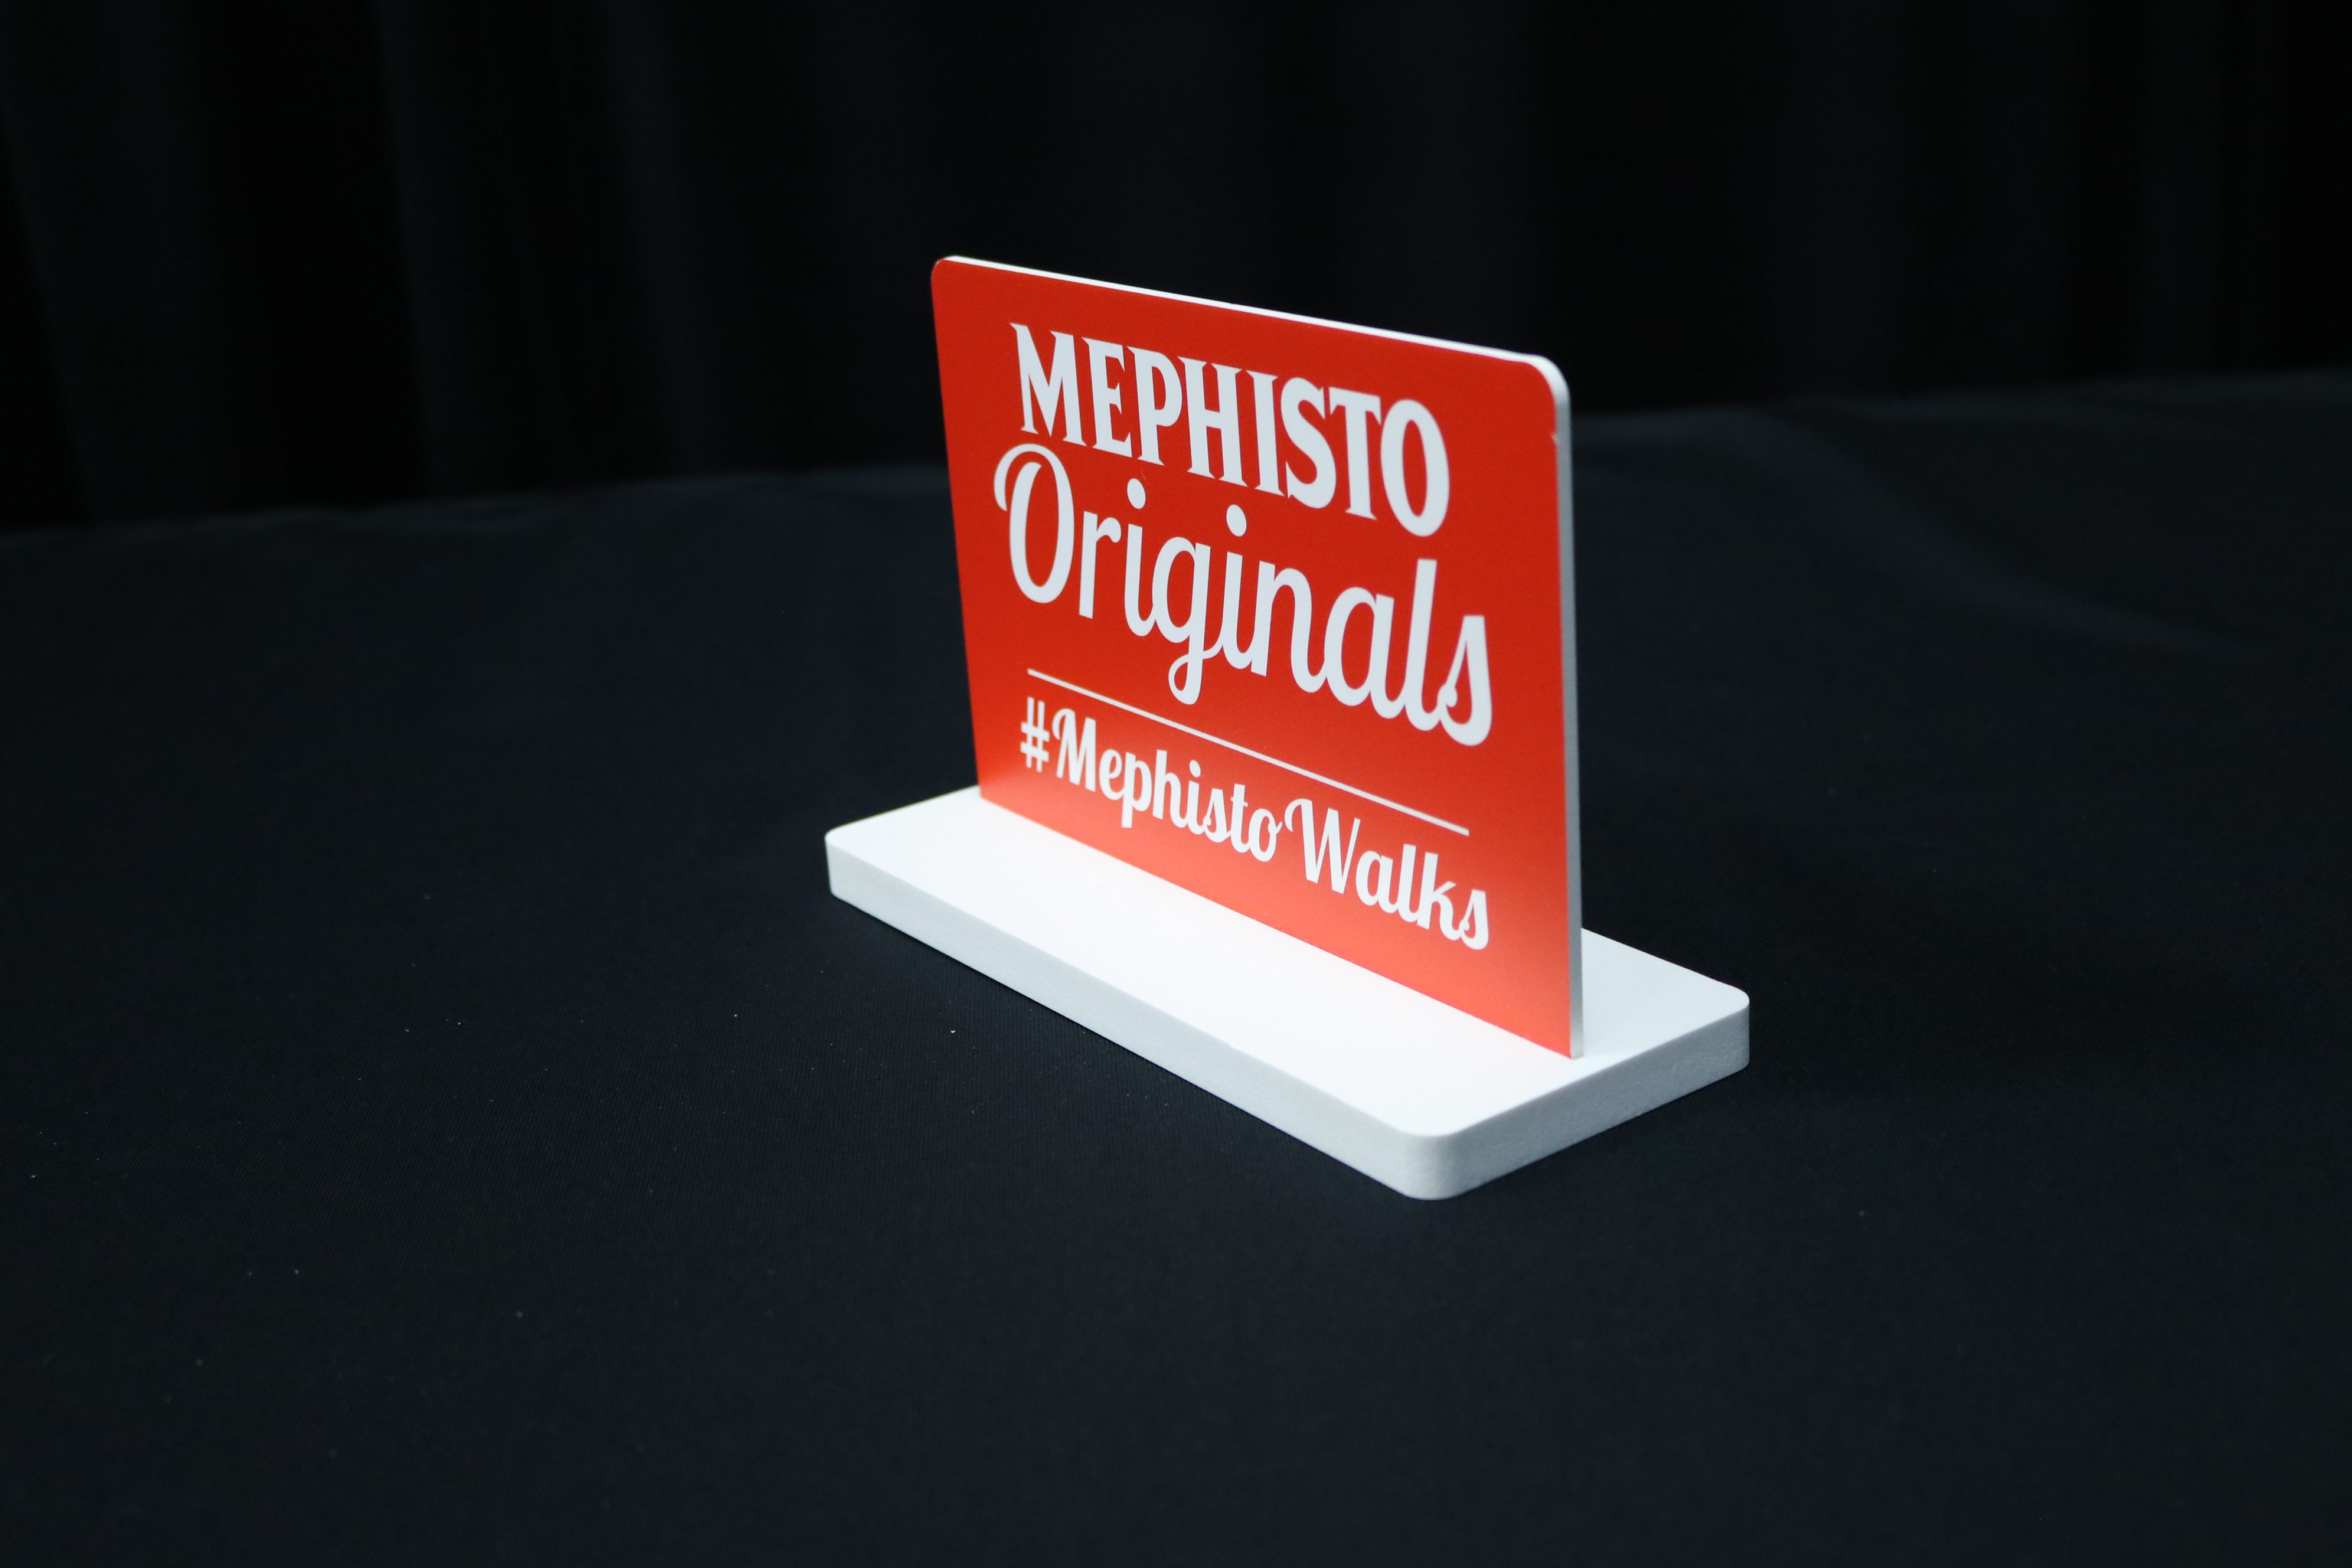 Tabletop display printed on 1/8" PVC inserted into slotted base.